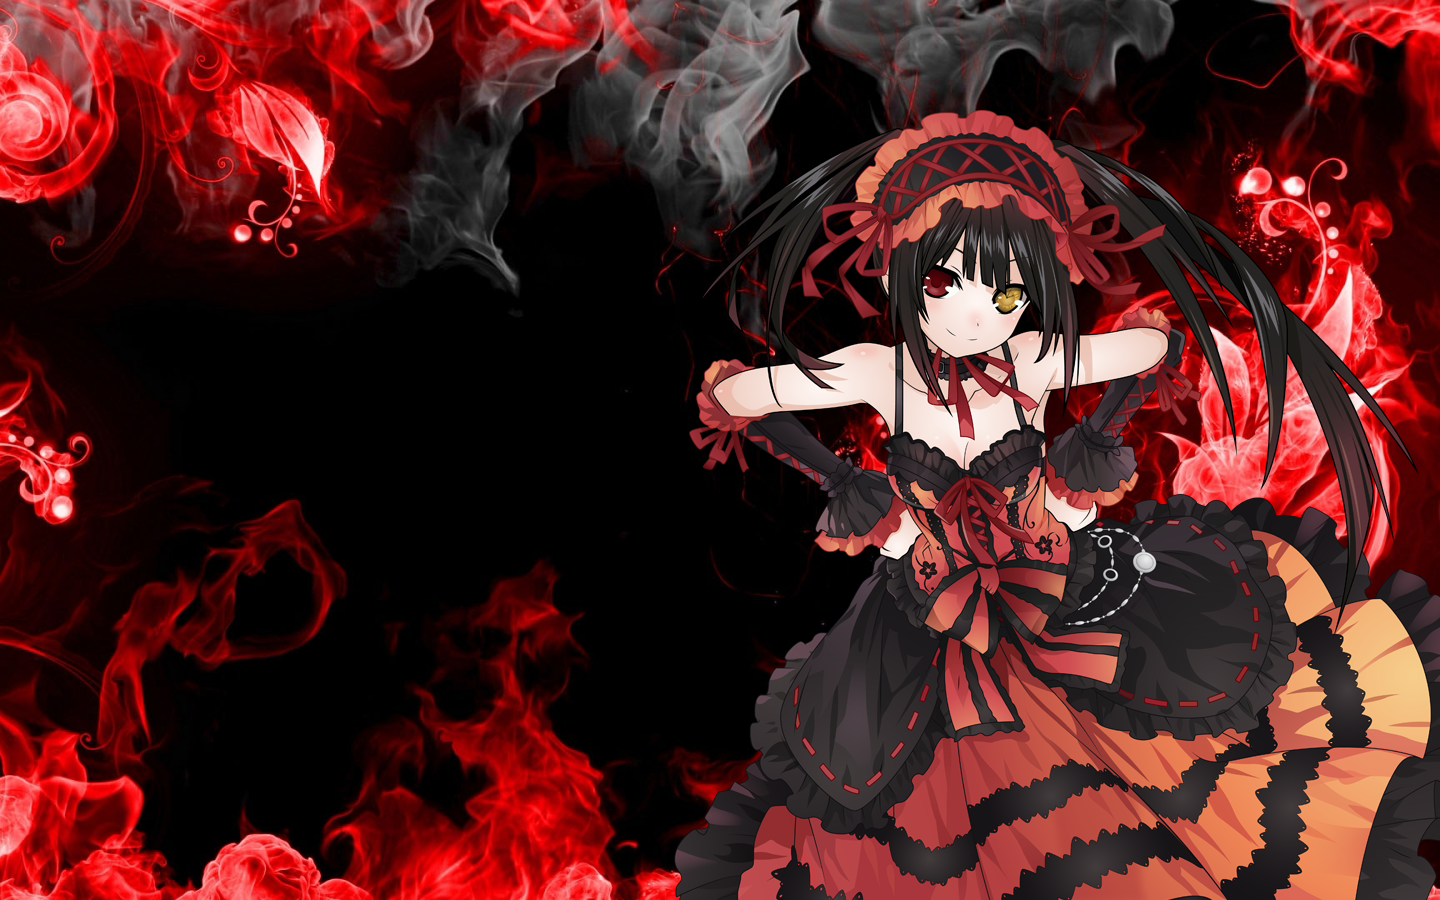 Date A Live wallpapers, Anime, HQ Date A Live pictures